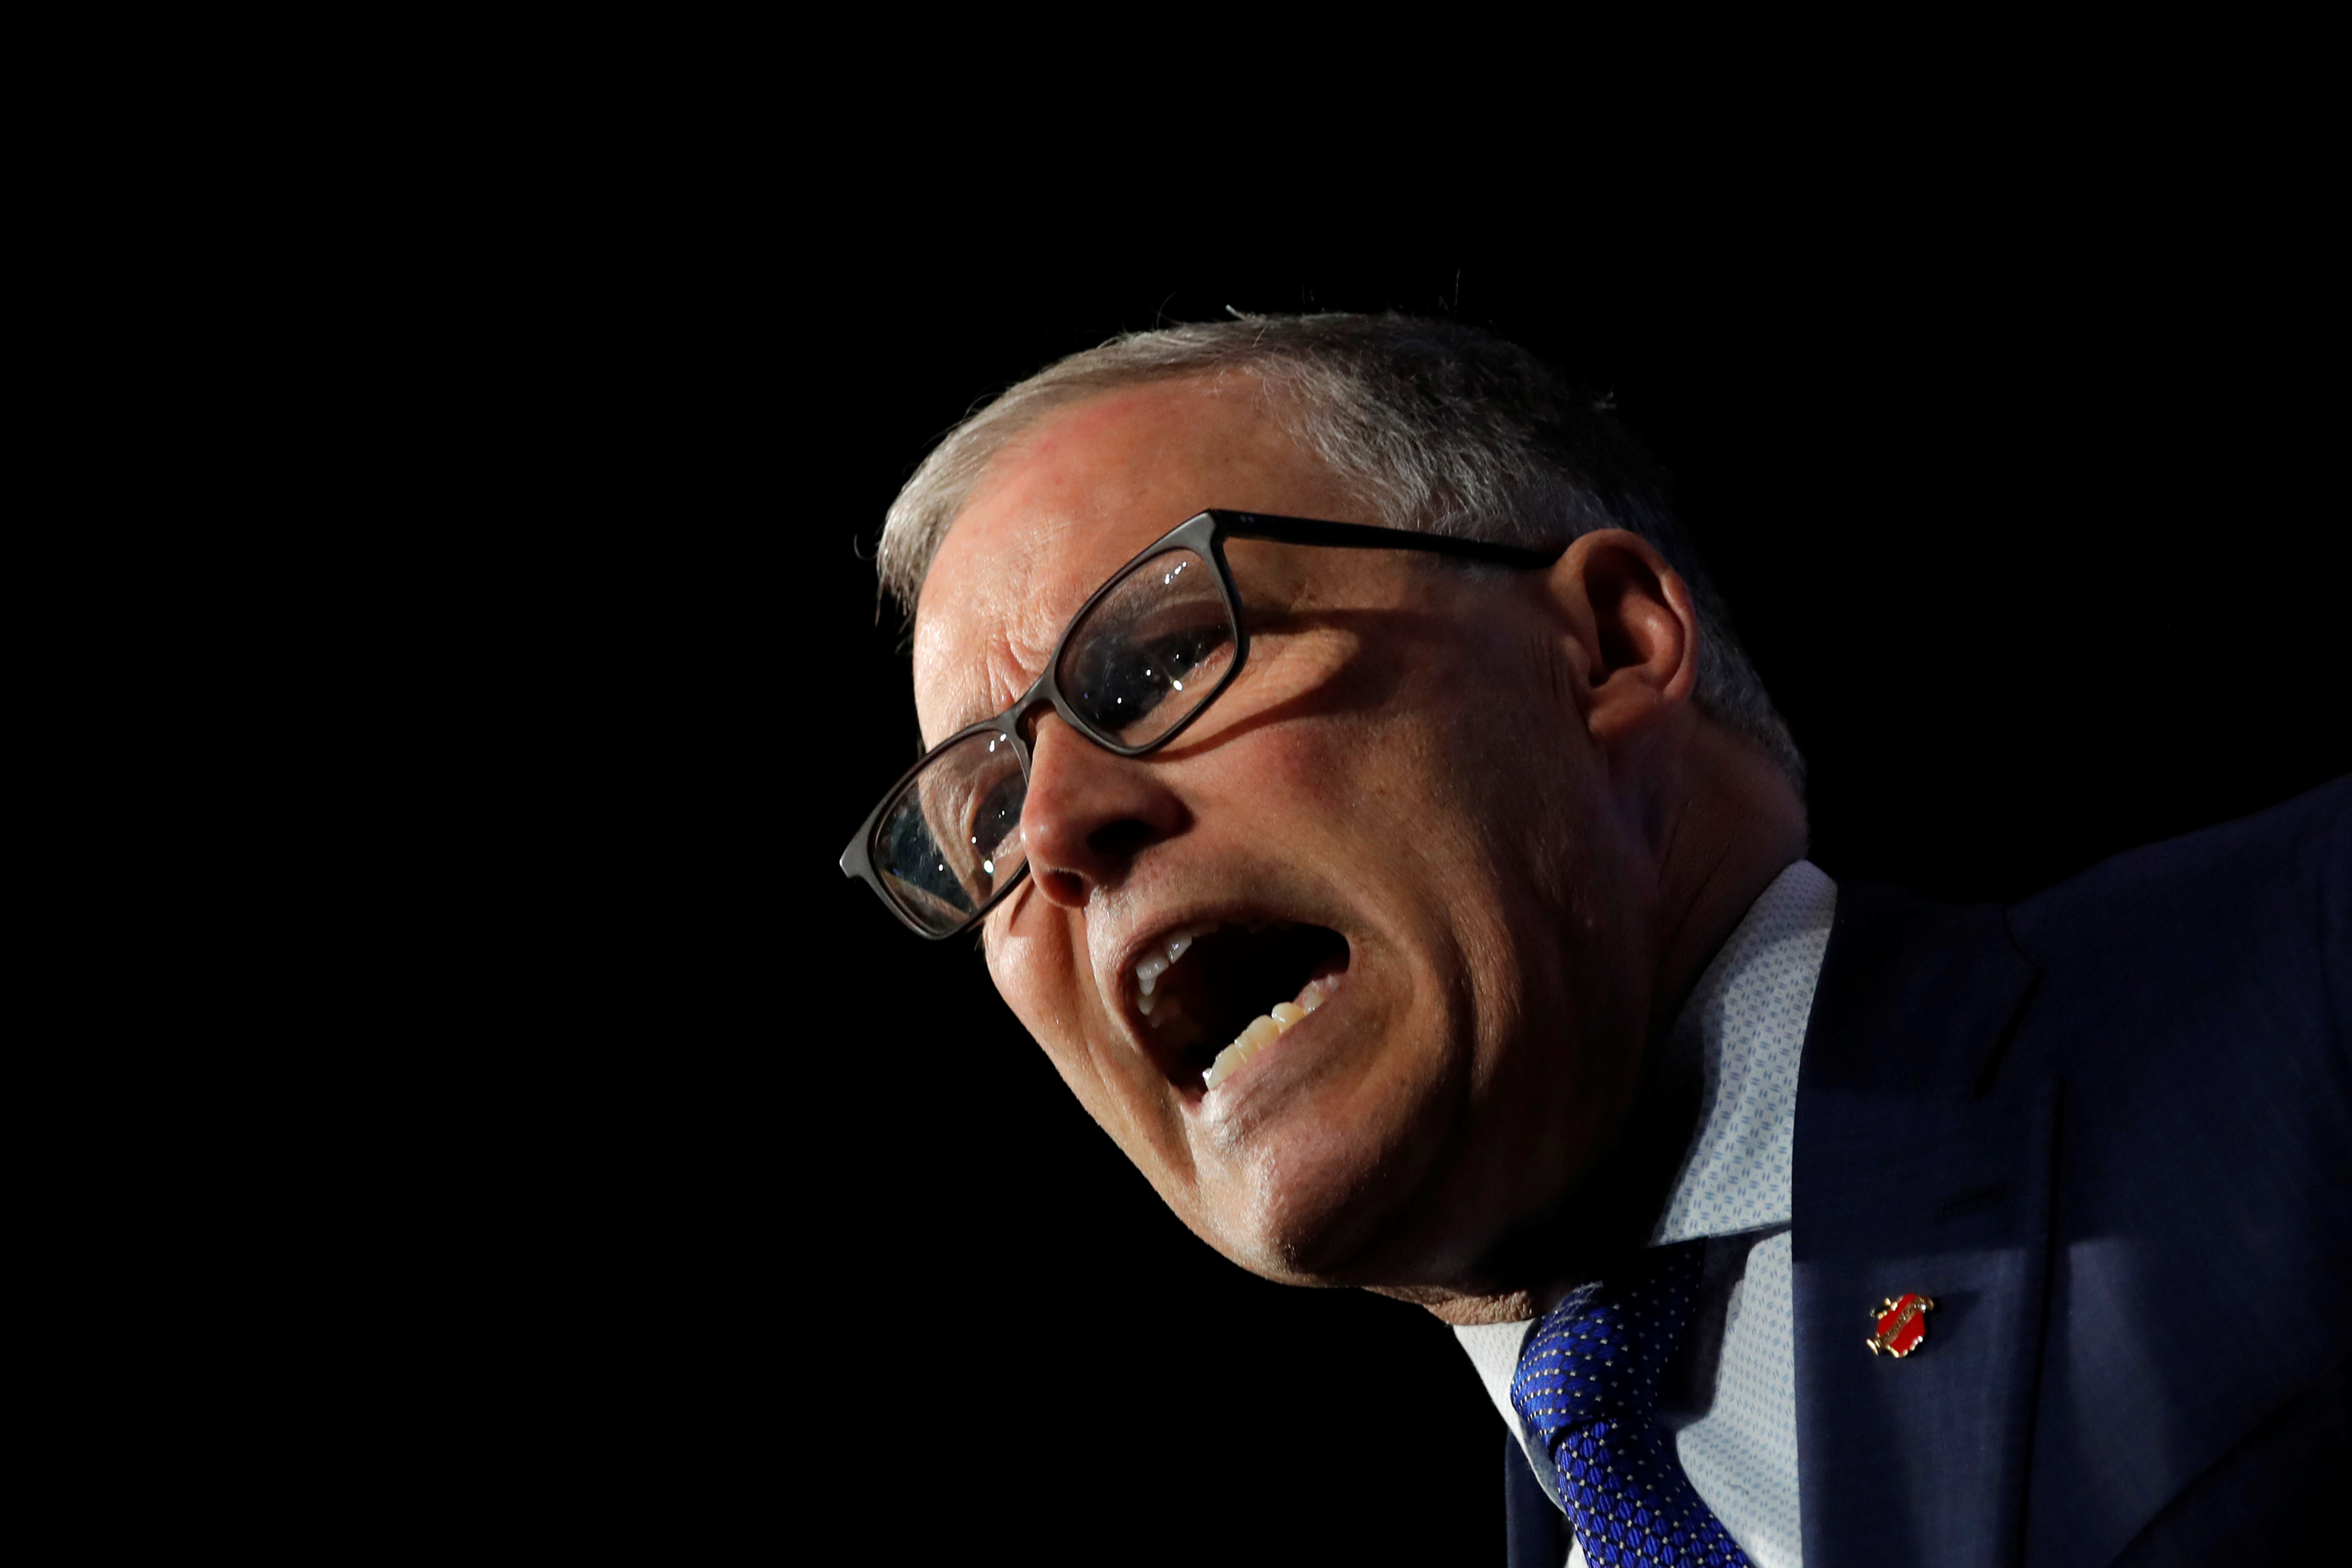 U.S. 2020 Democratic presidential candidate and Governor Jay Inslee participates in a moderated discussion at the We the People Summit in Washington